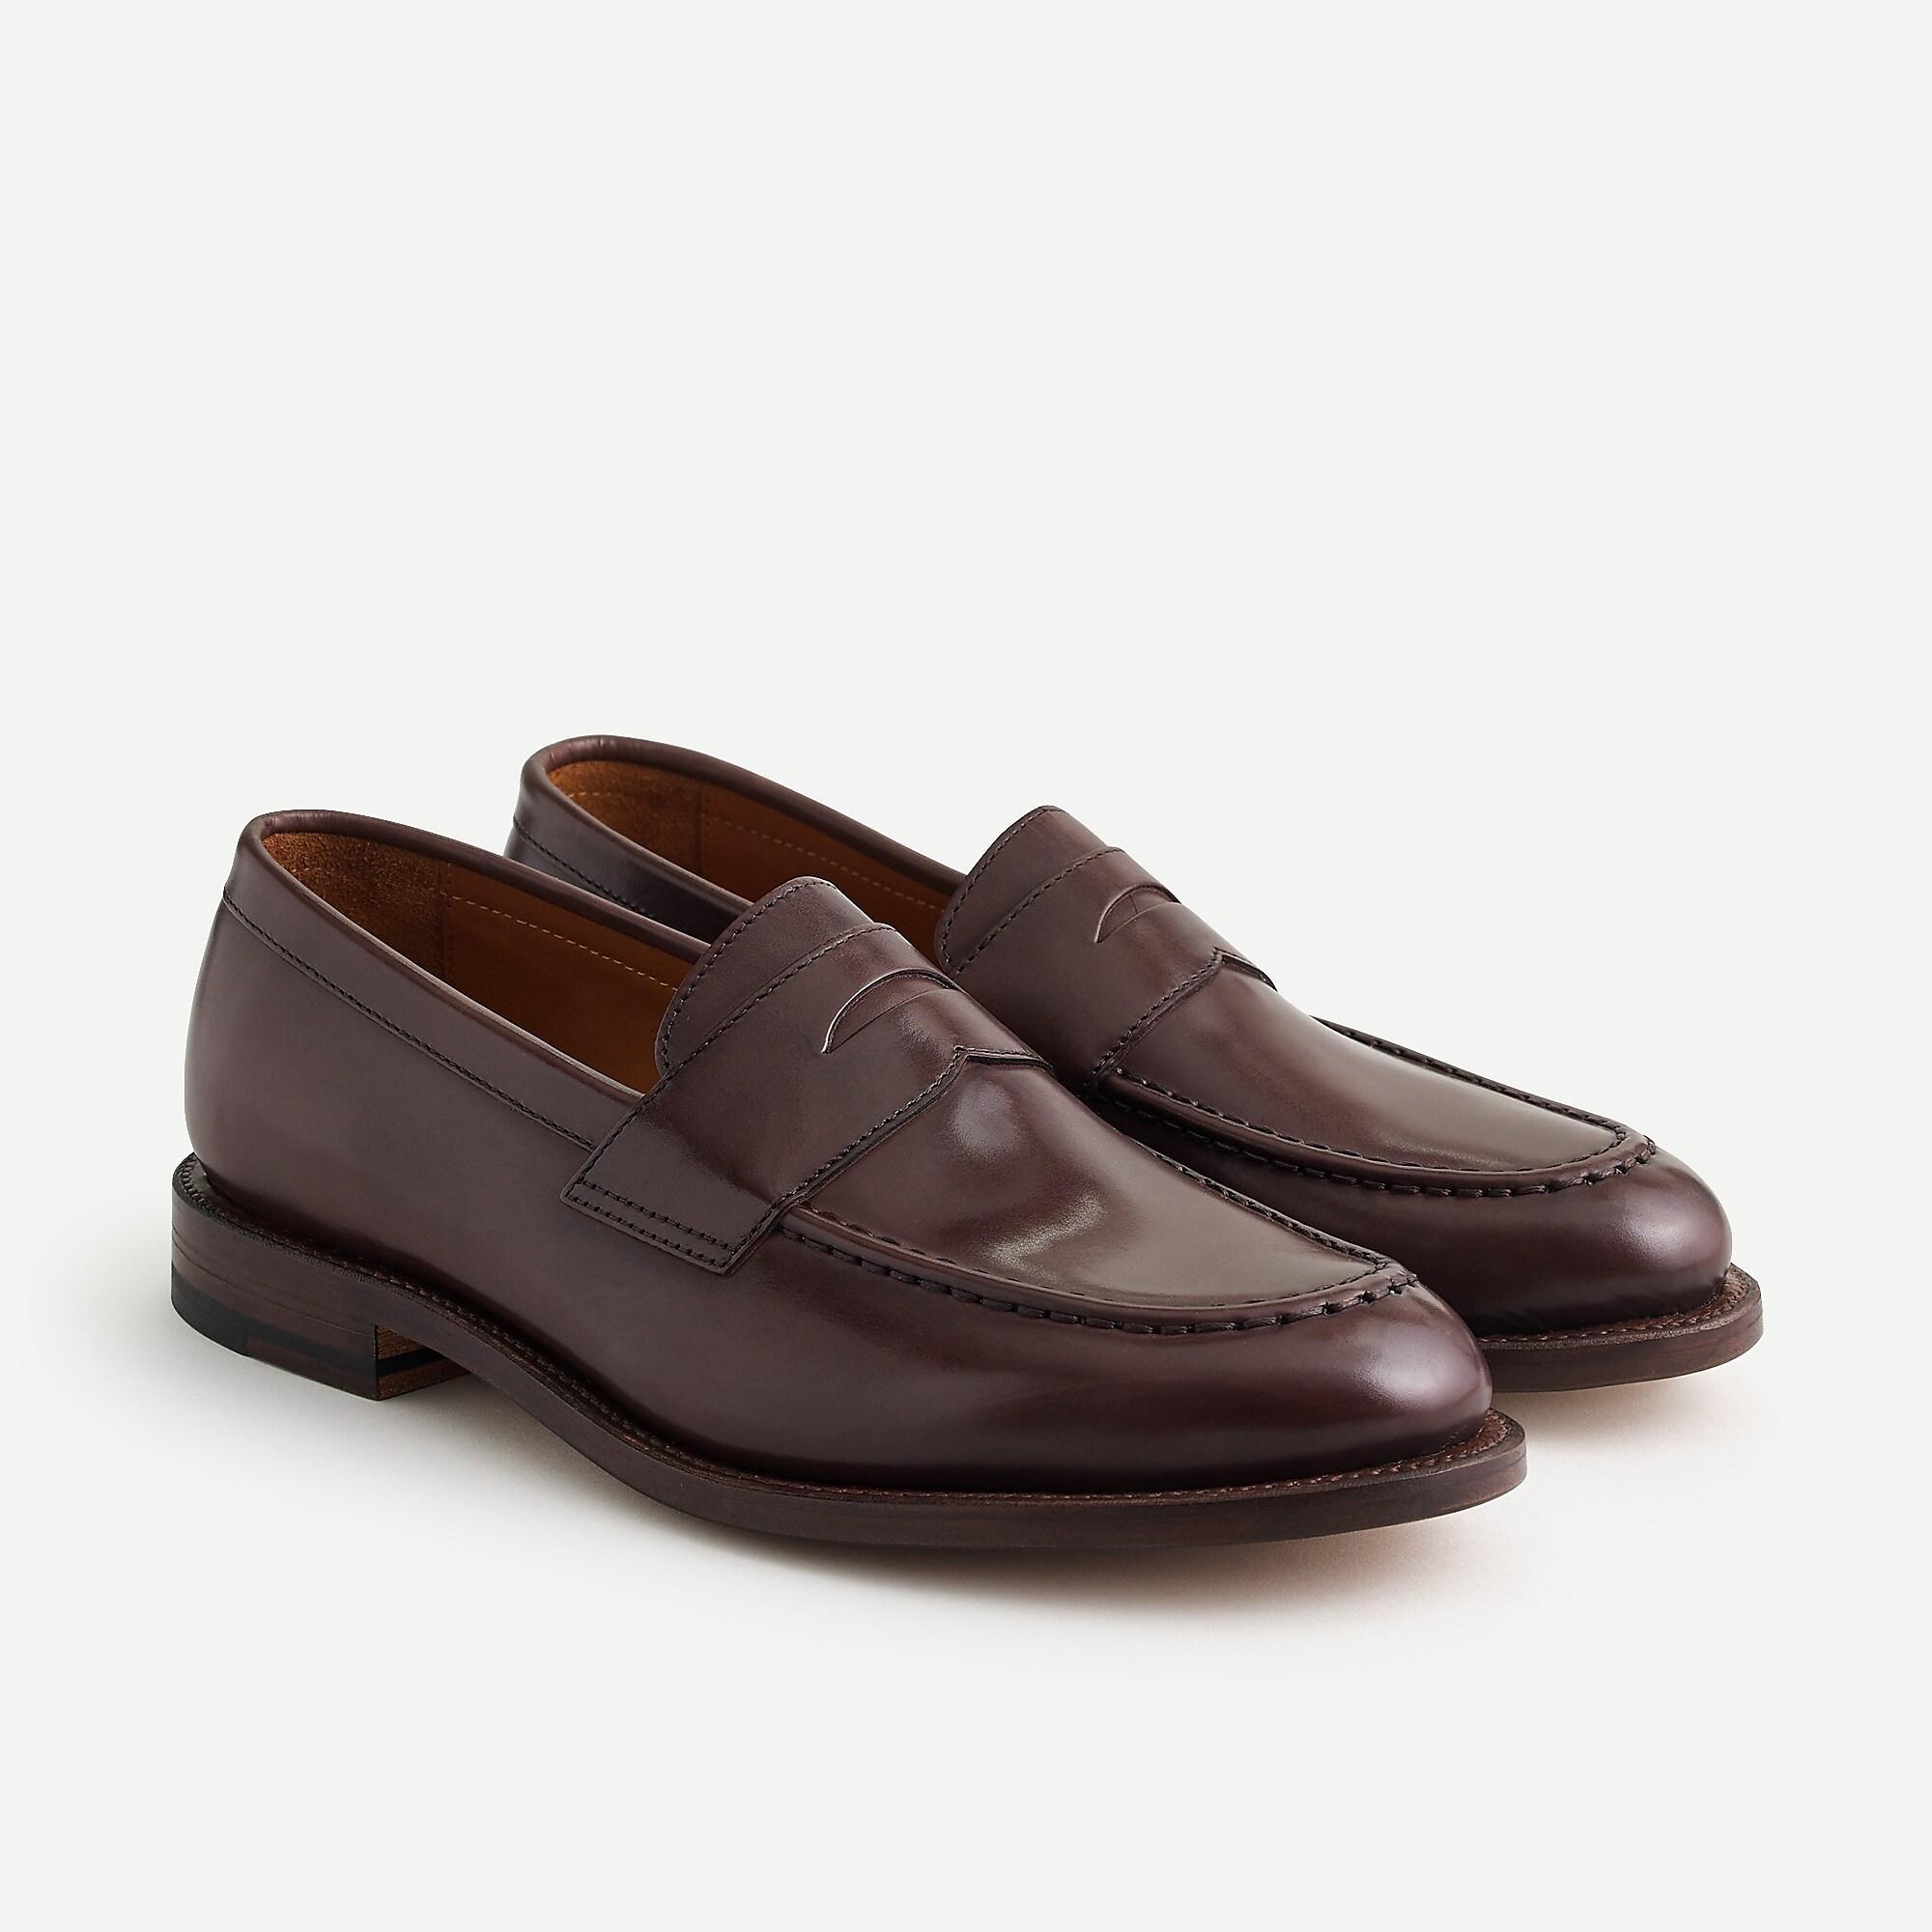 J.Crew Ludlow Italian Leather Penny Loafers in Brown for Men - Save 89% ...